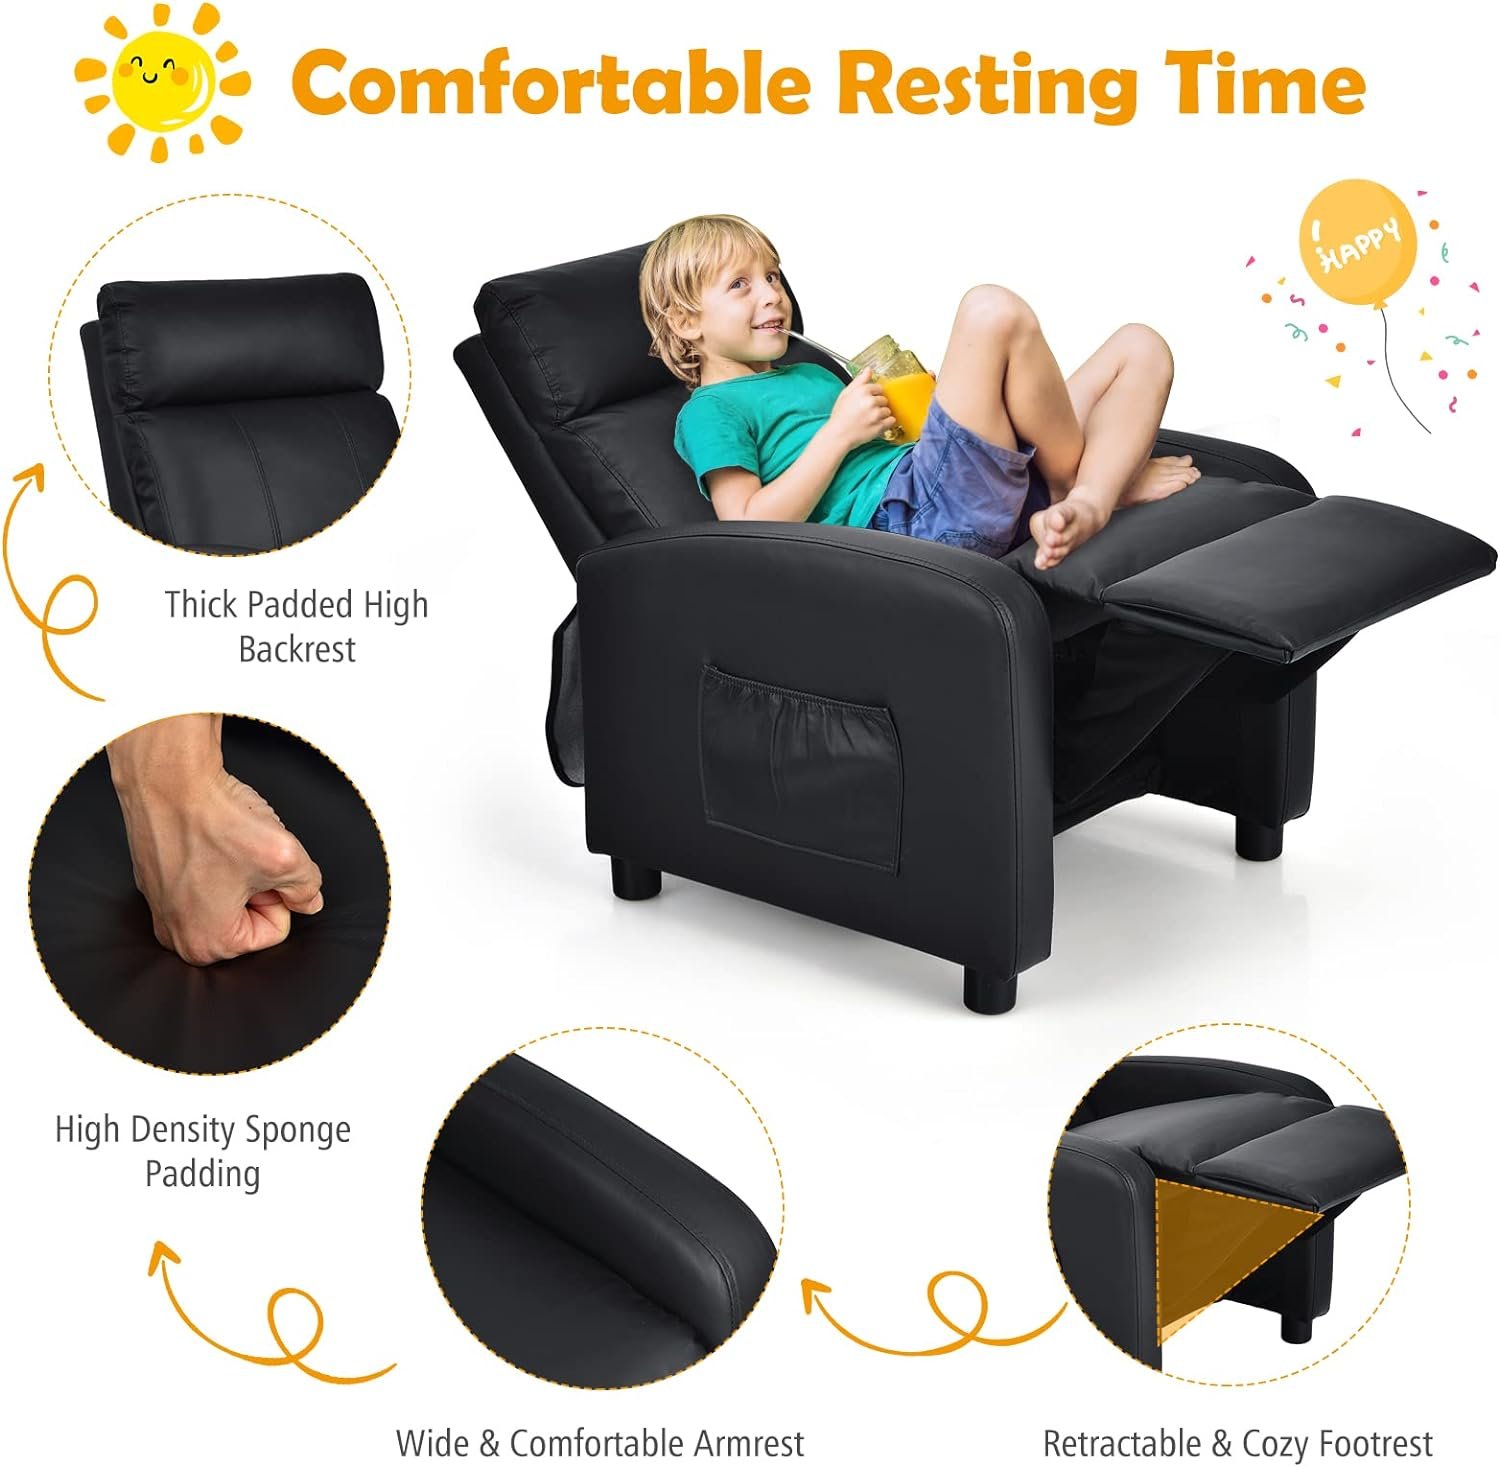 Costzon Kids Recliner Lounge Chair Review